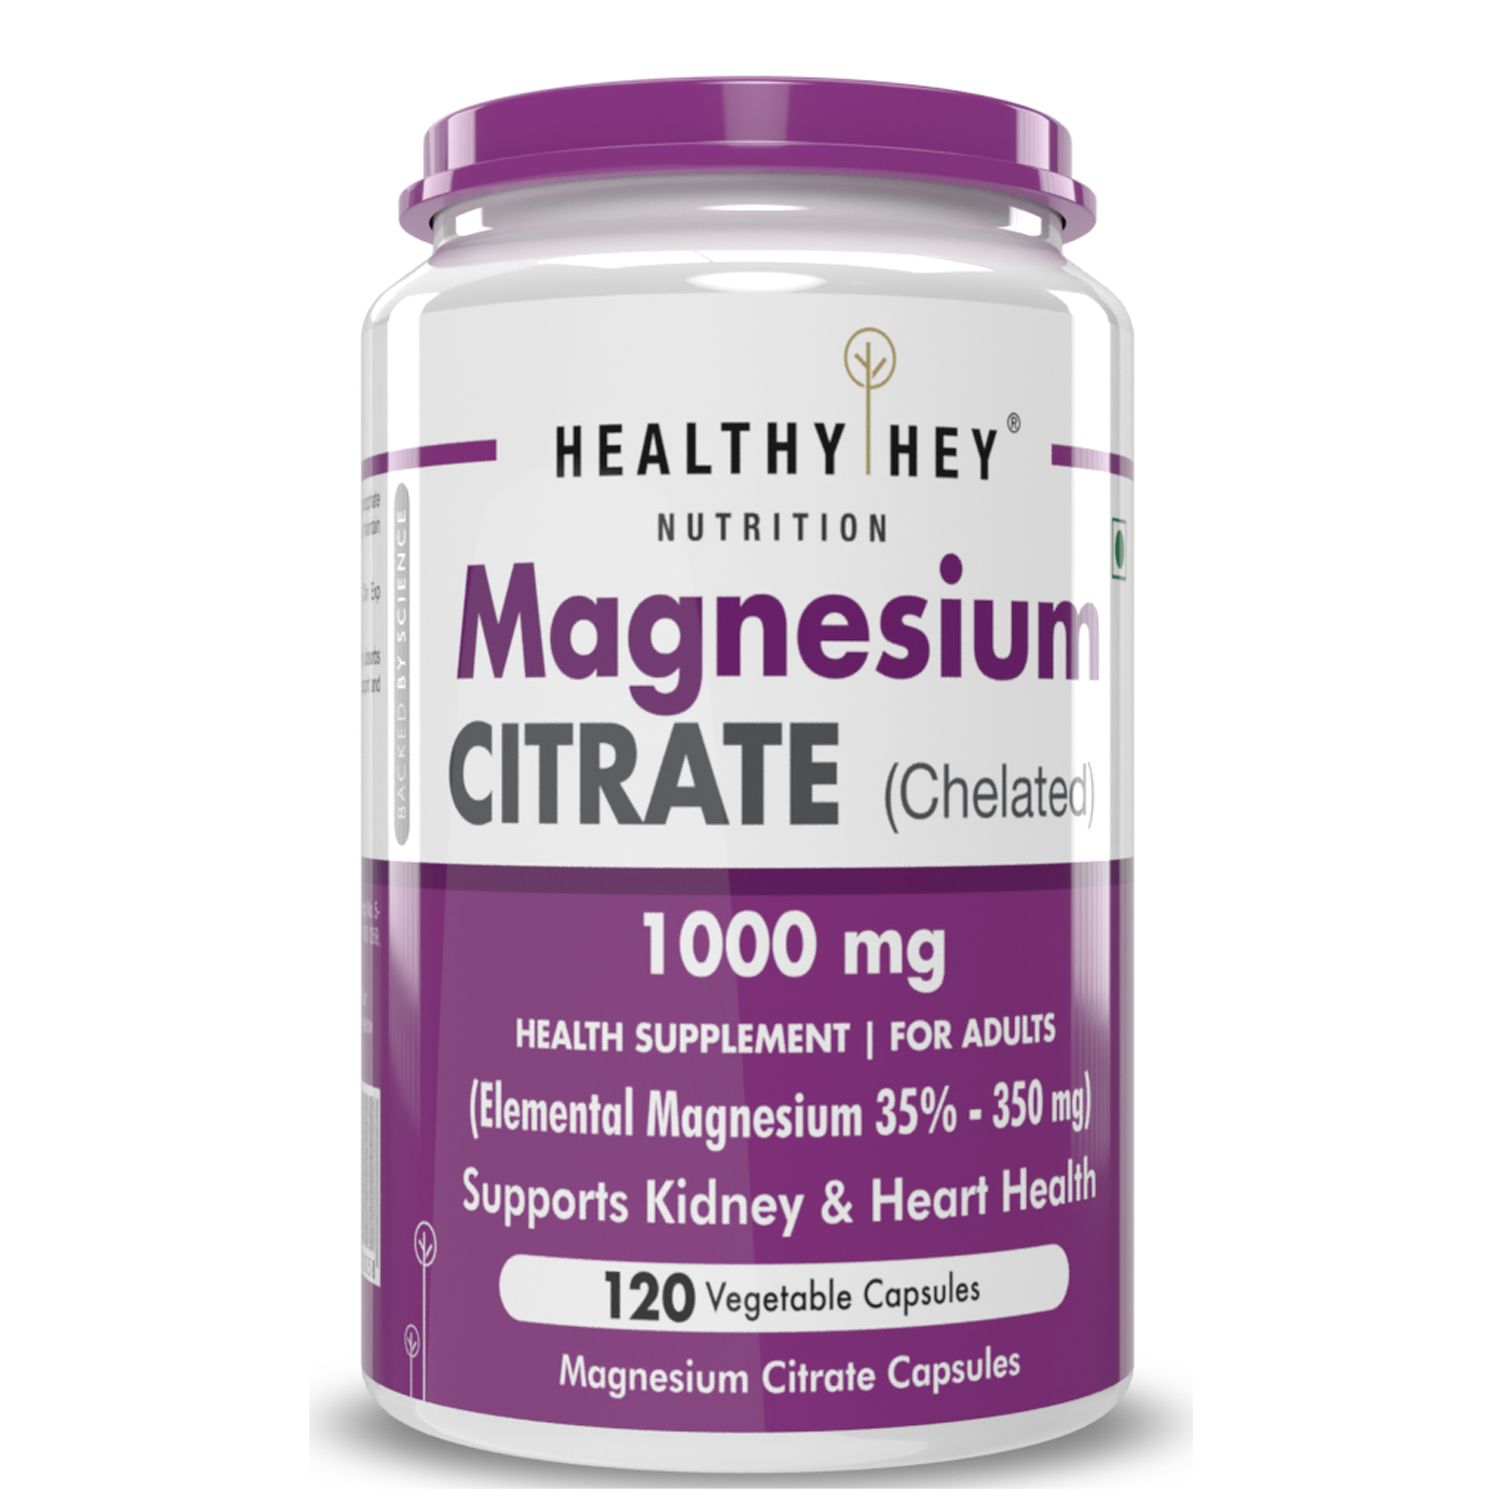 HealthyHey Nutrition Magnesium Citrate (120 Vegetable Capsules)